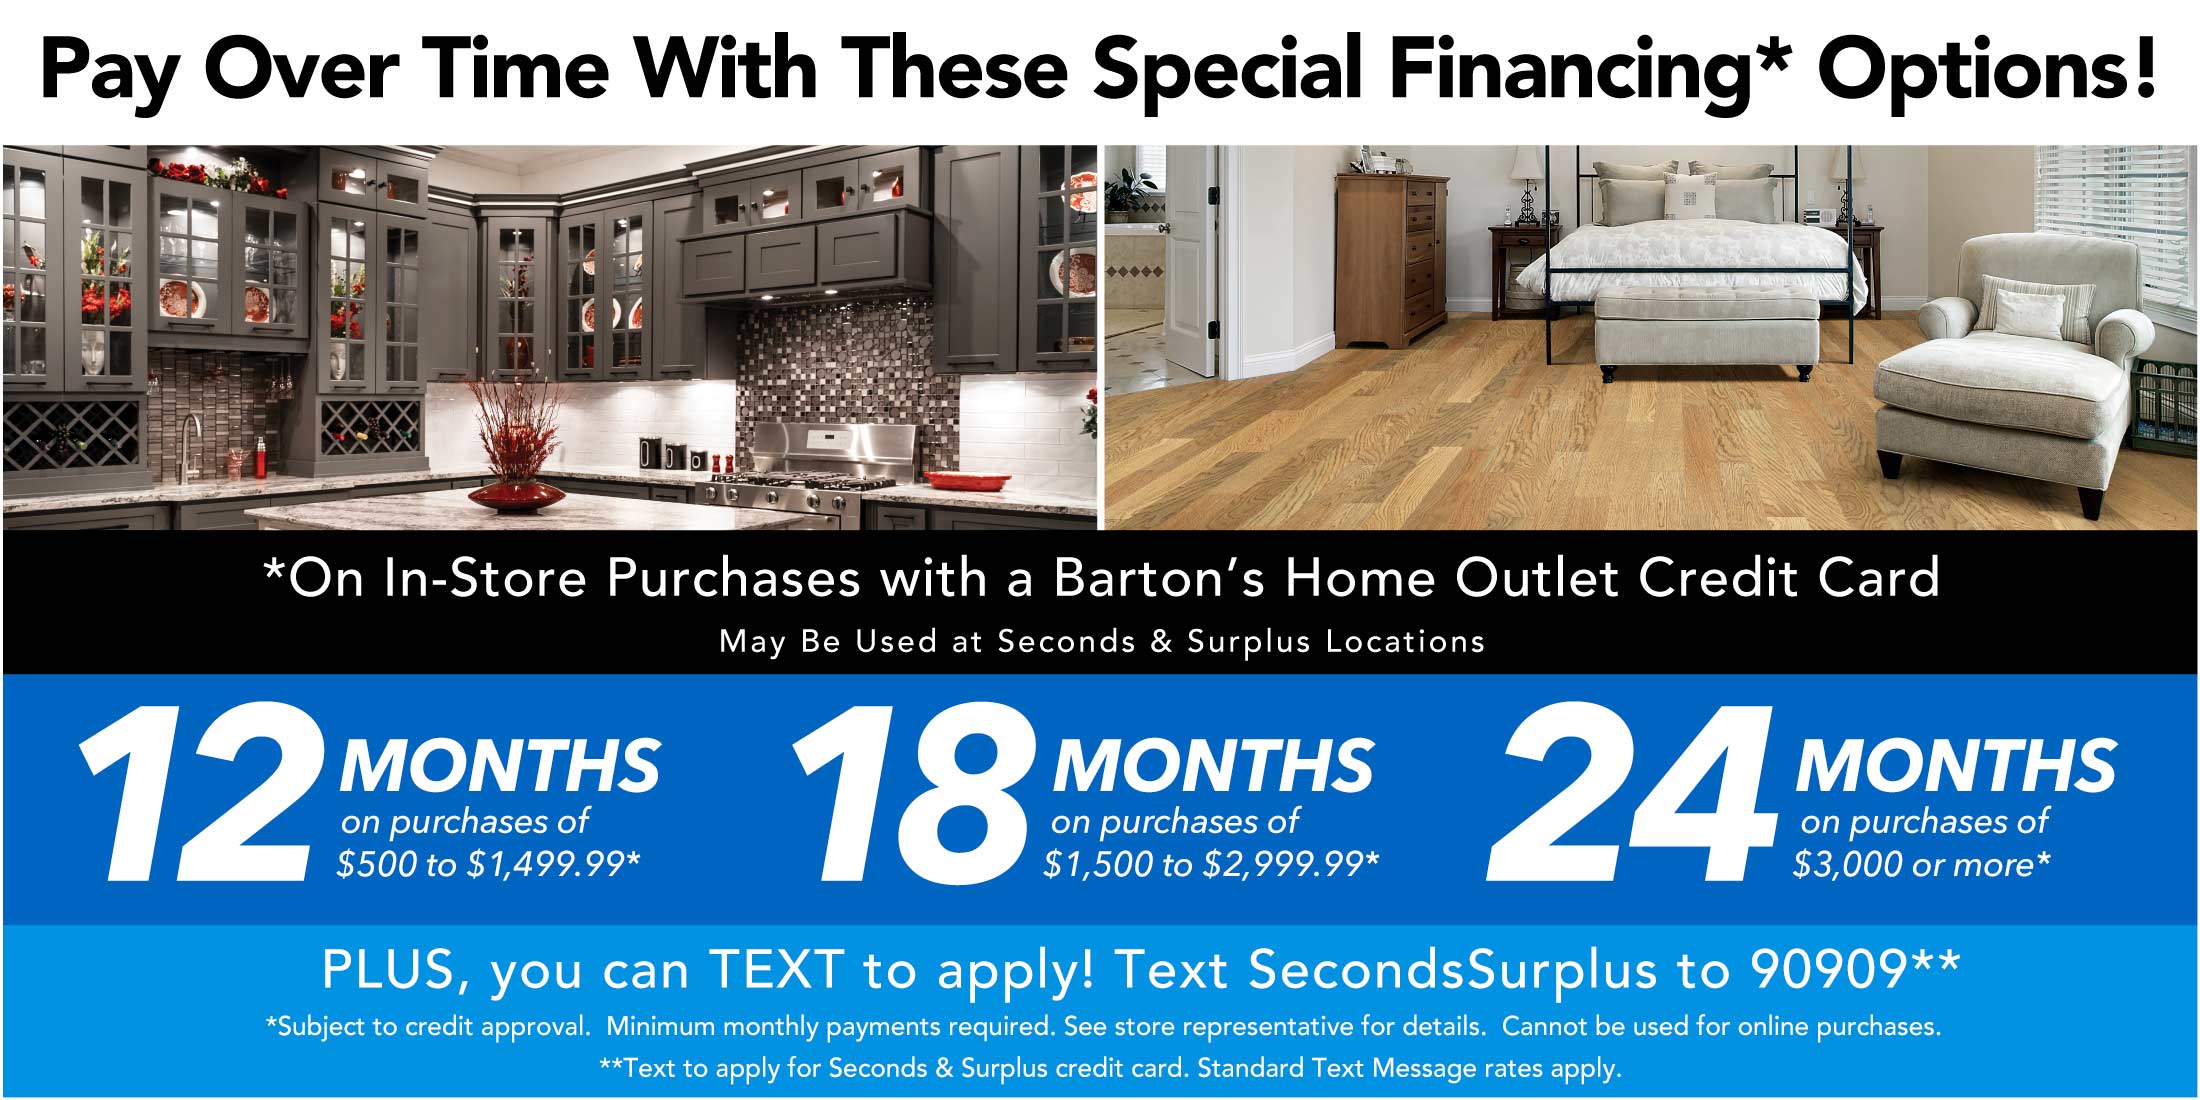 Pay Over Time With These Special Financing Options!